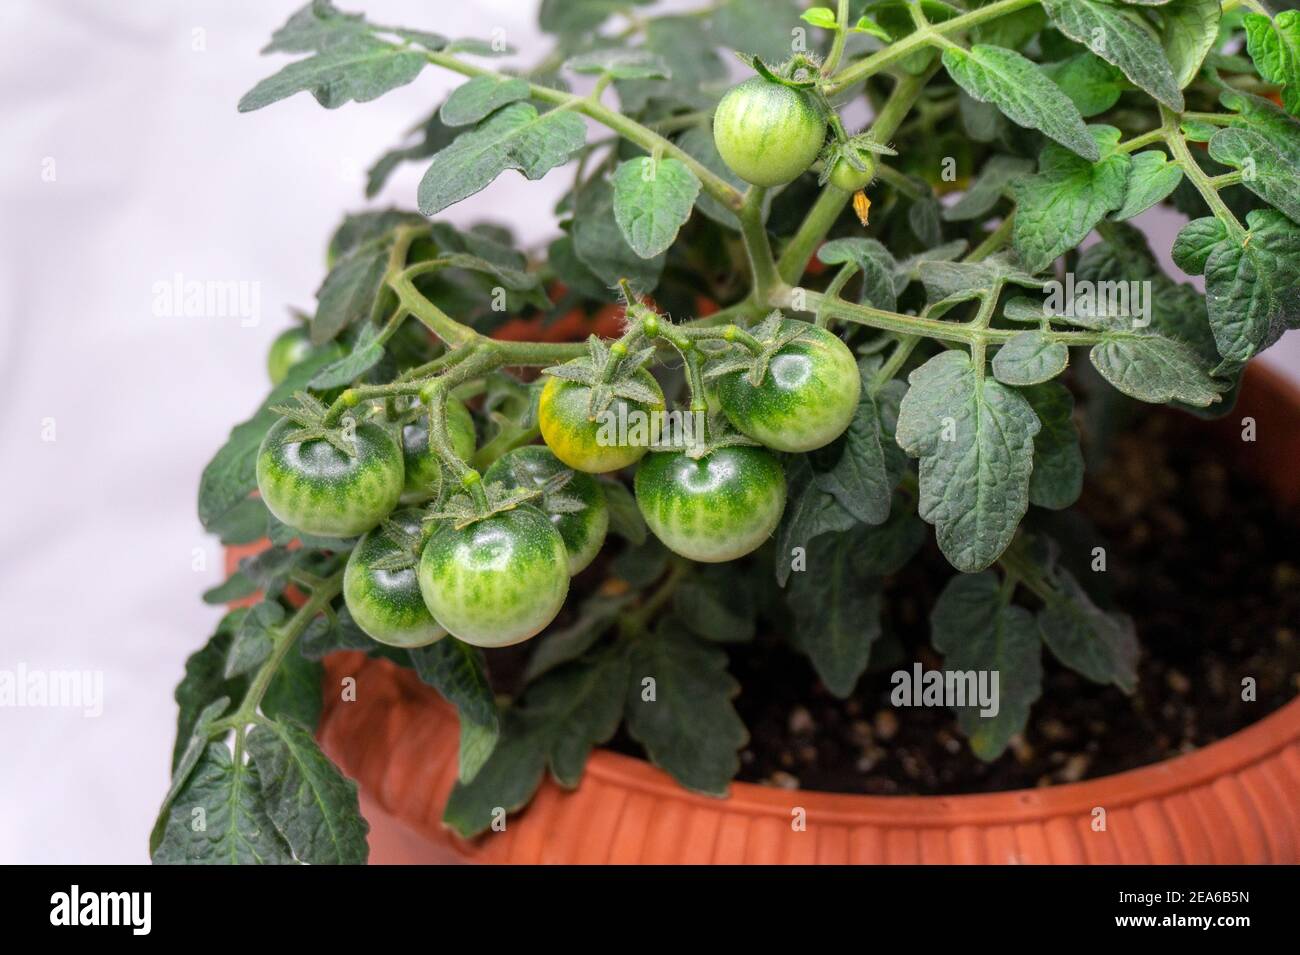 micro tomatoes for home cultivation in a pot on a light background Stock Photo